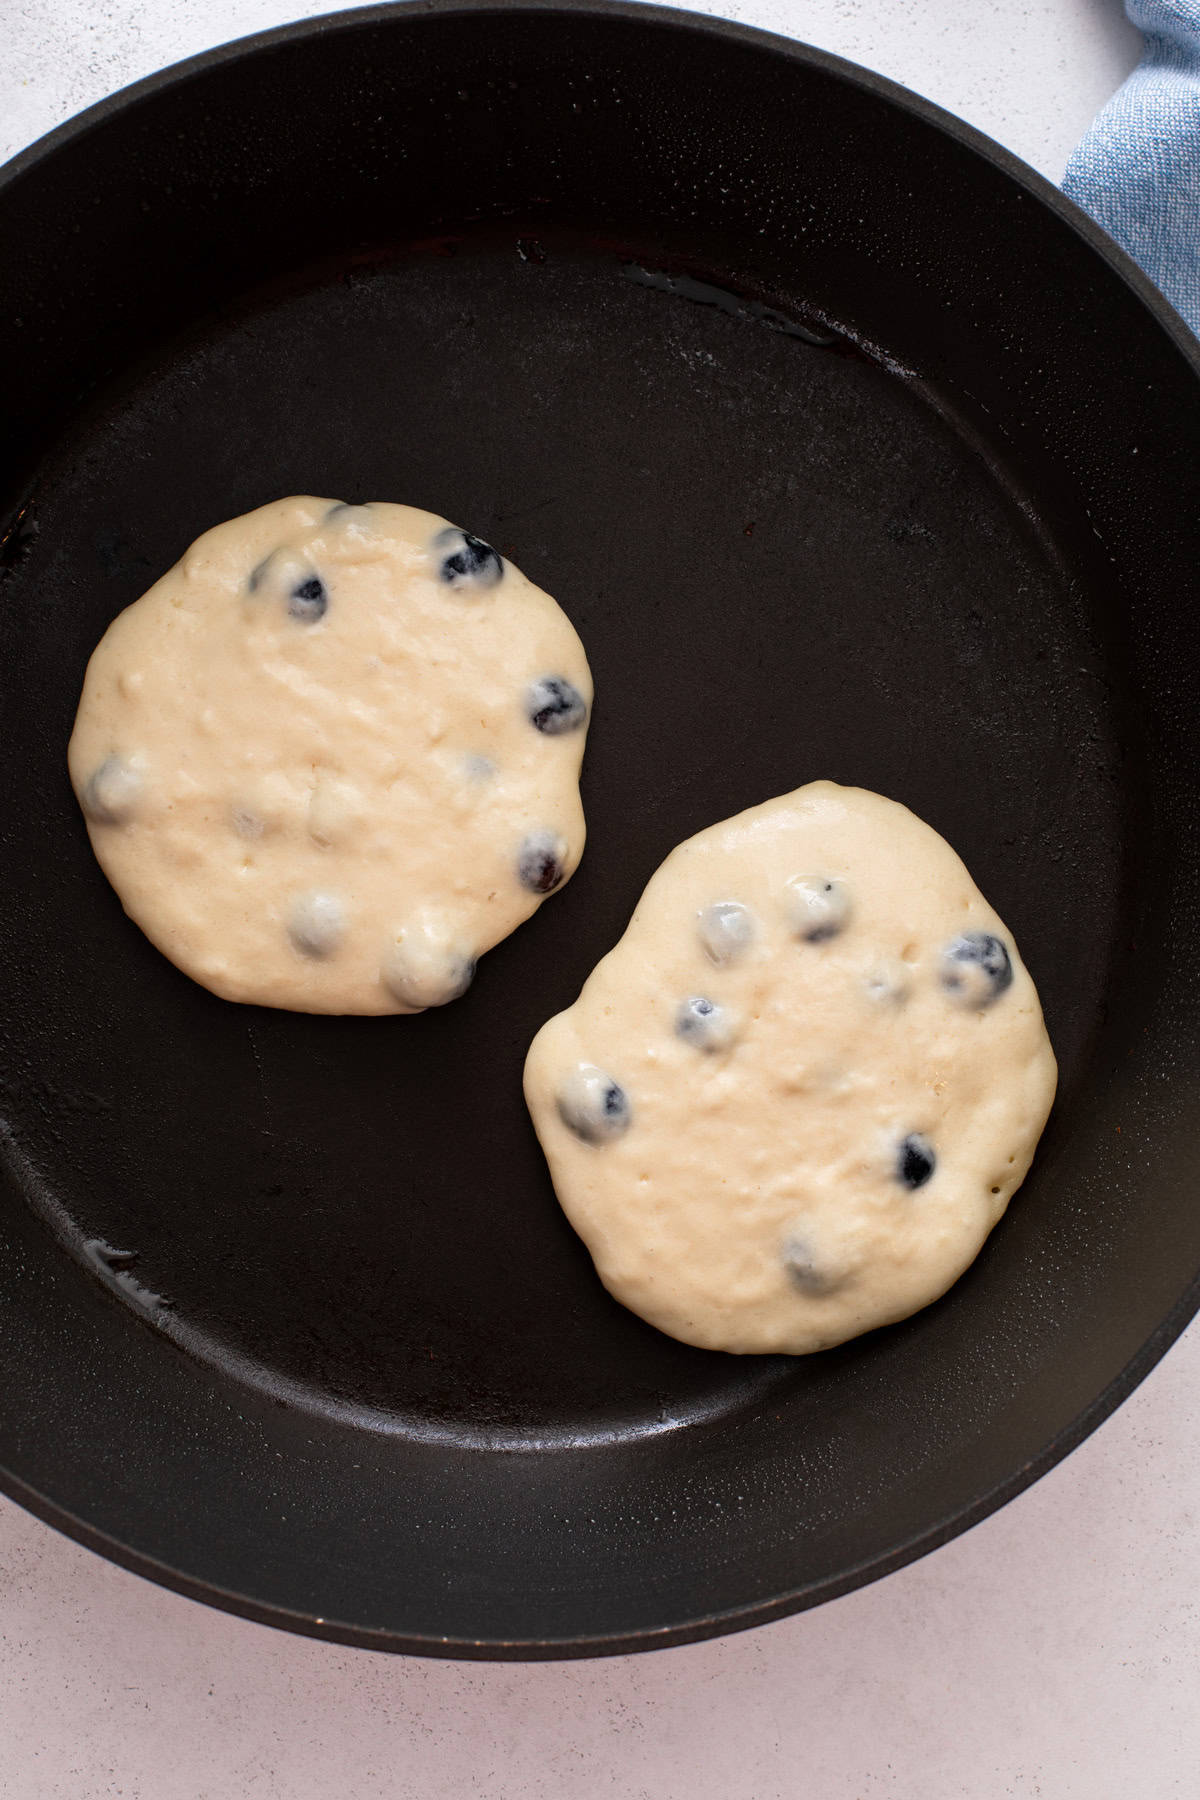 Two blueberry pancakes cooking in a black skillet.